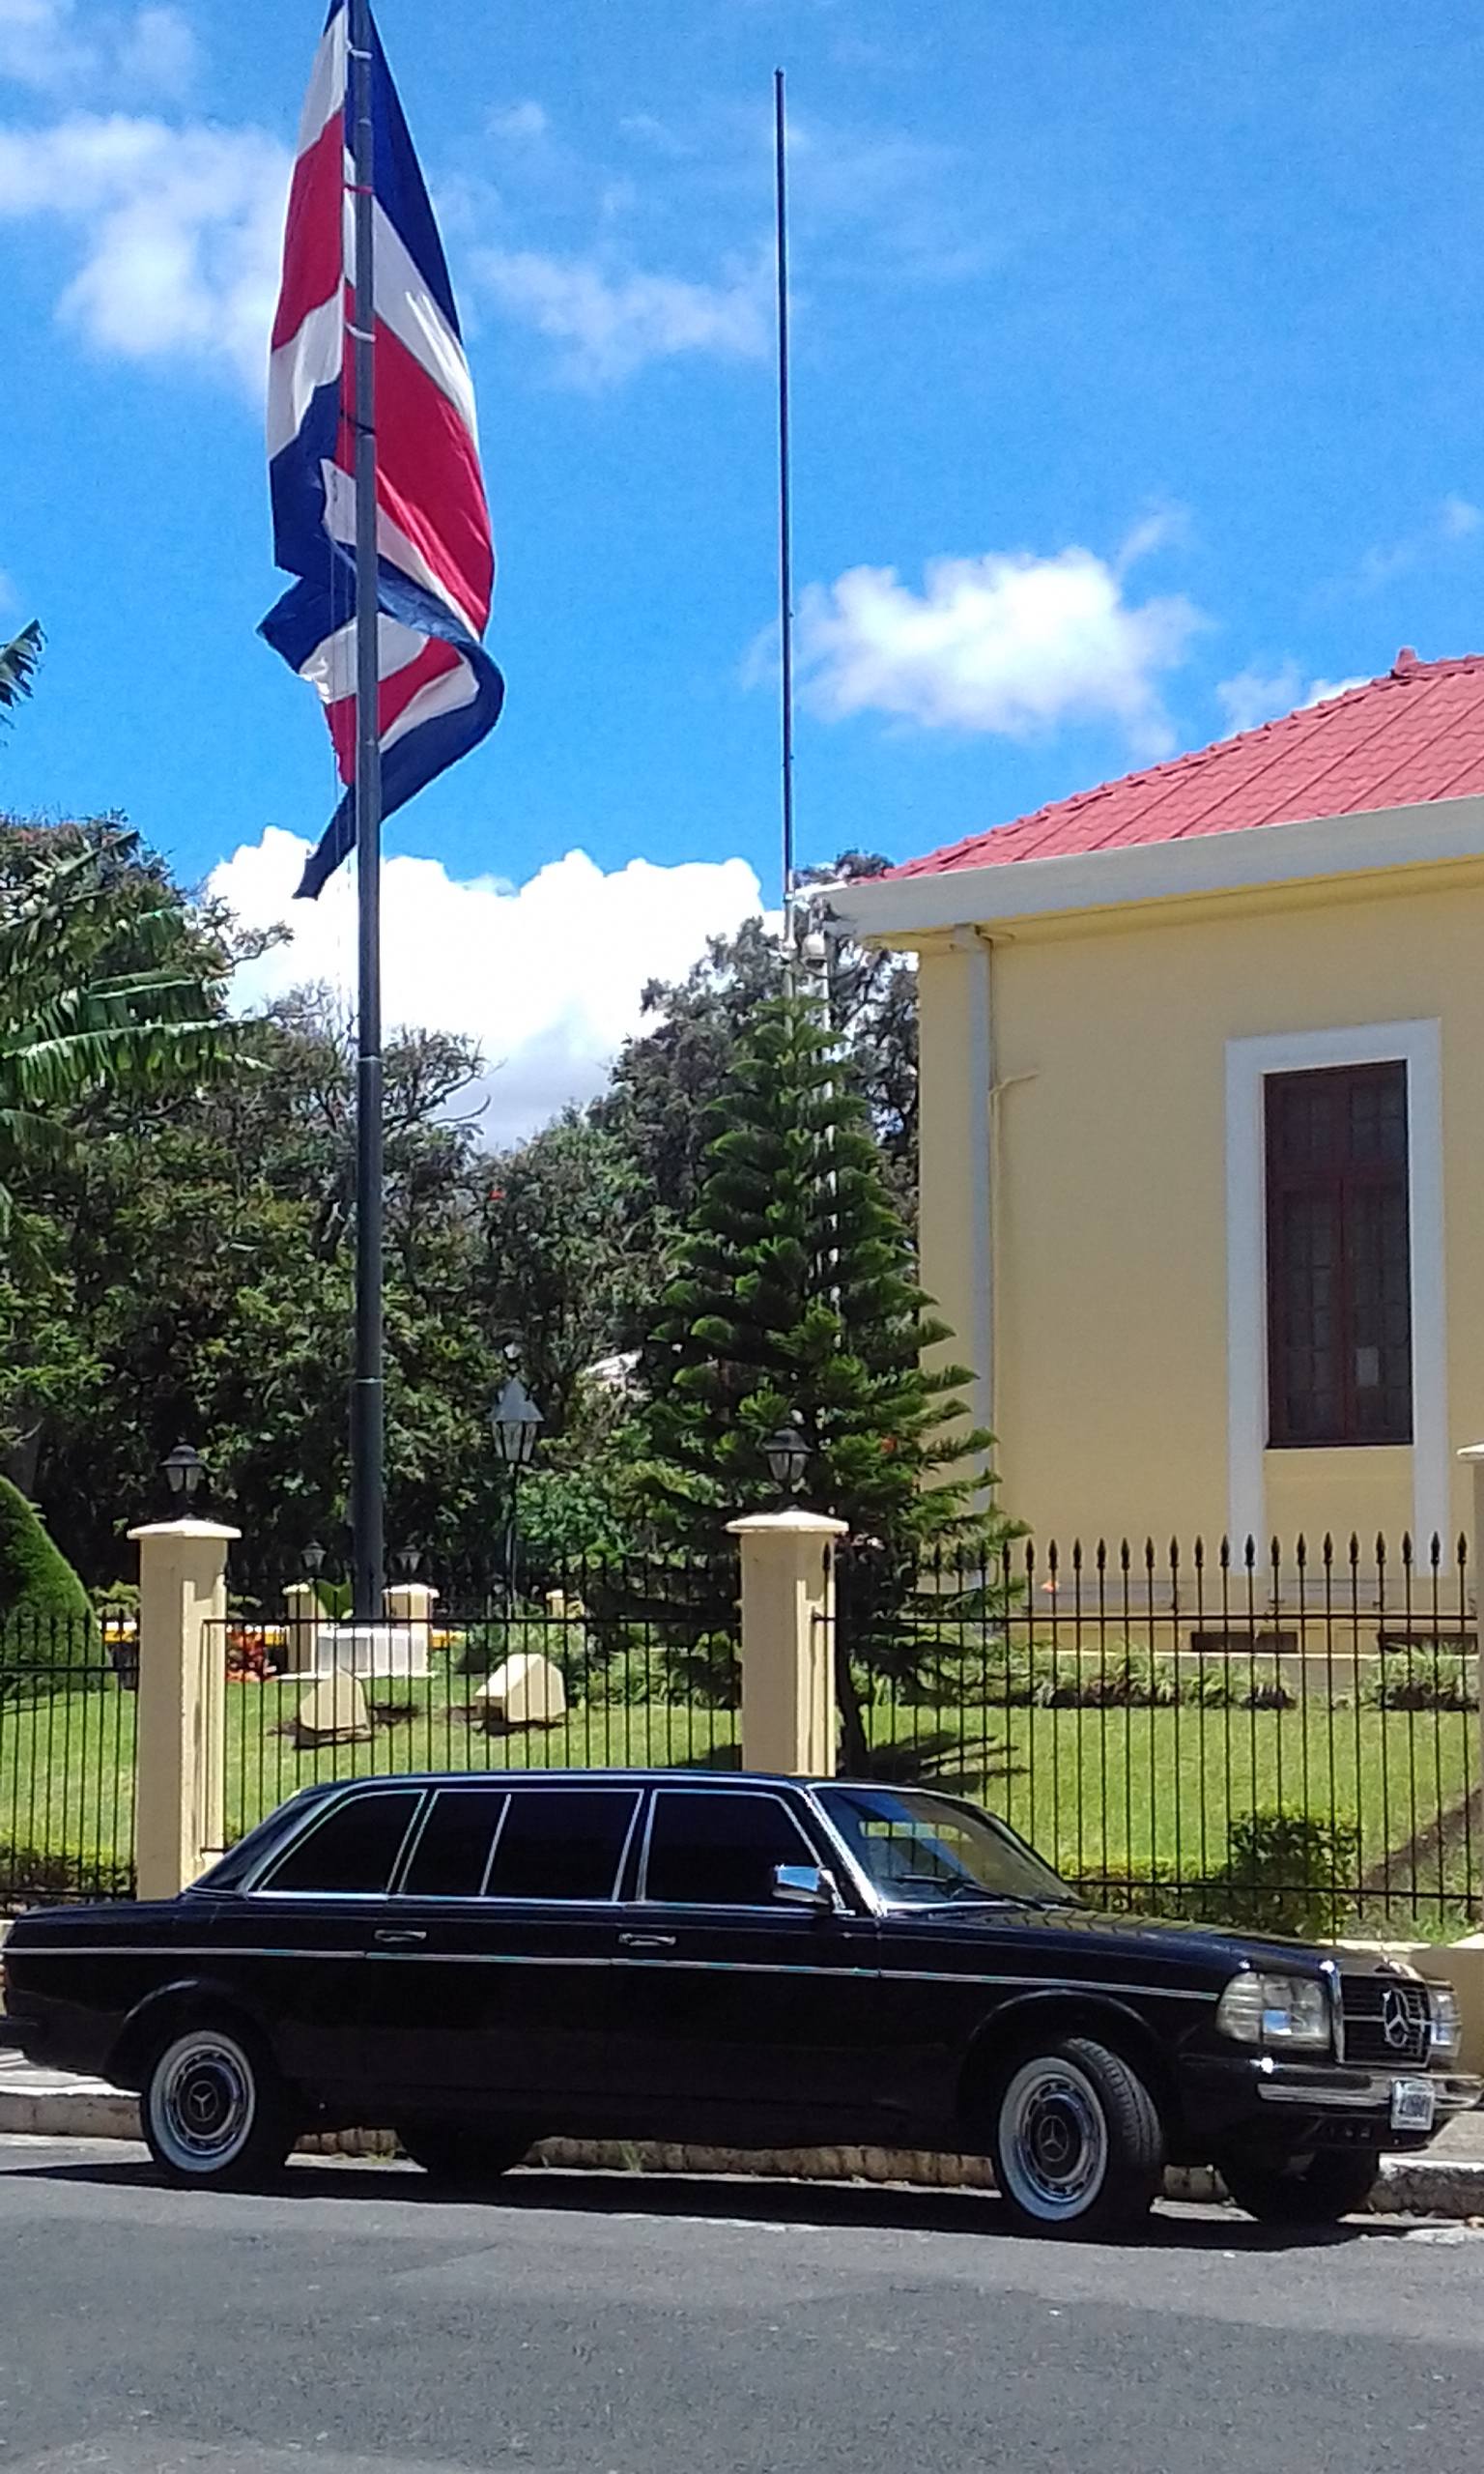 COSTA RICA FLAG WITH A MERCEDES 300D LANG LIMO